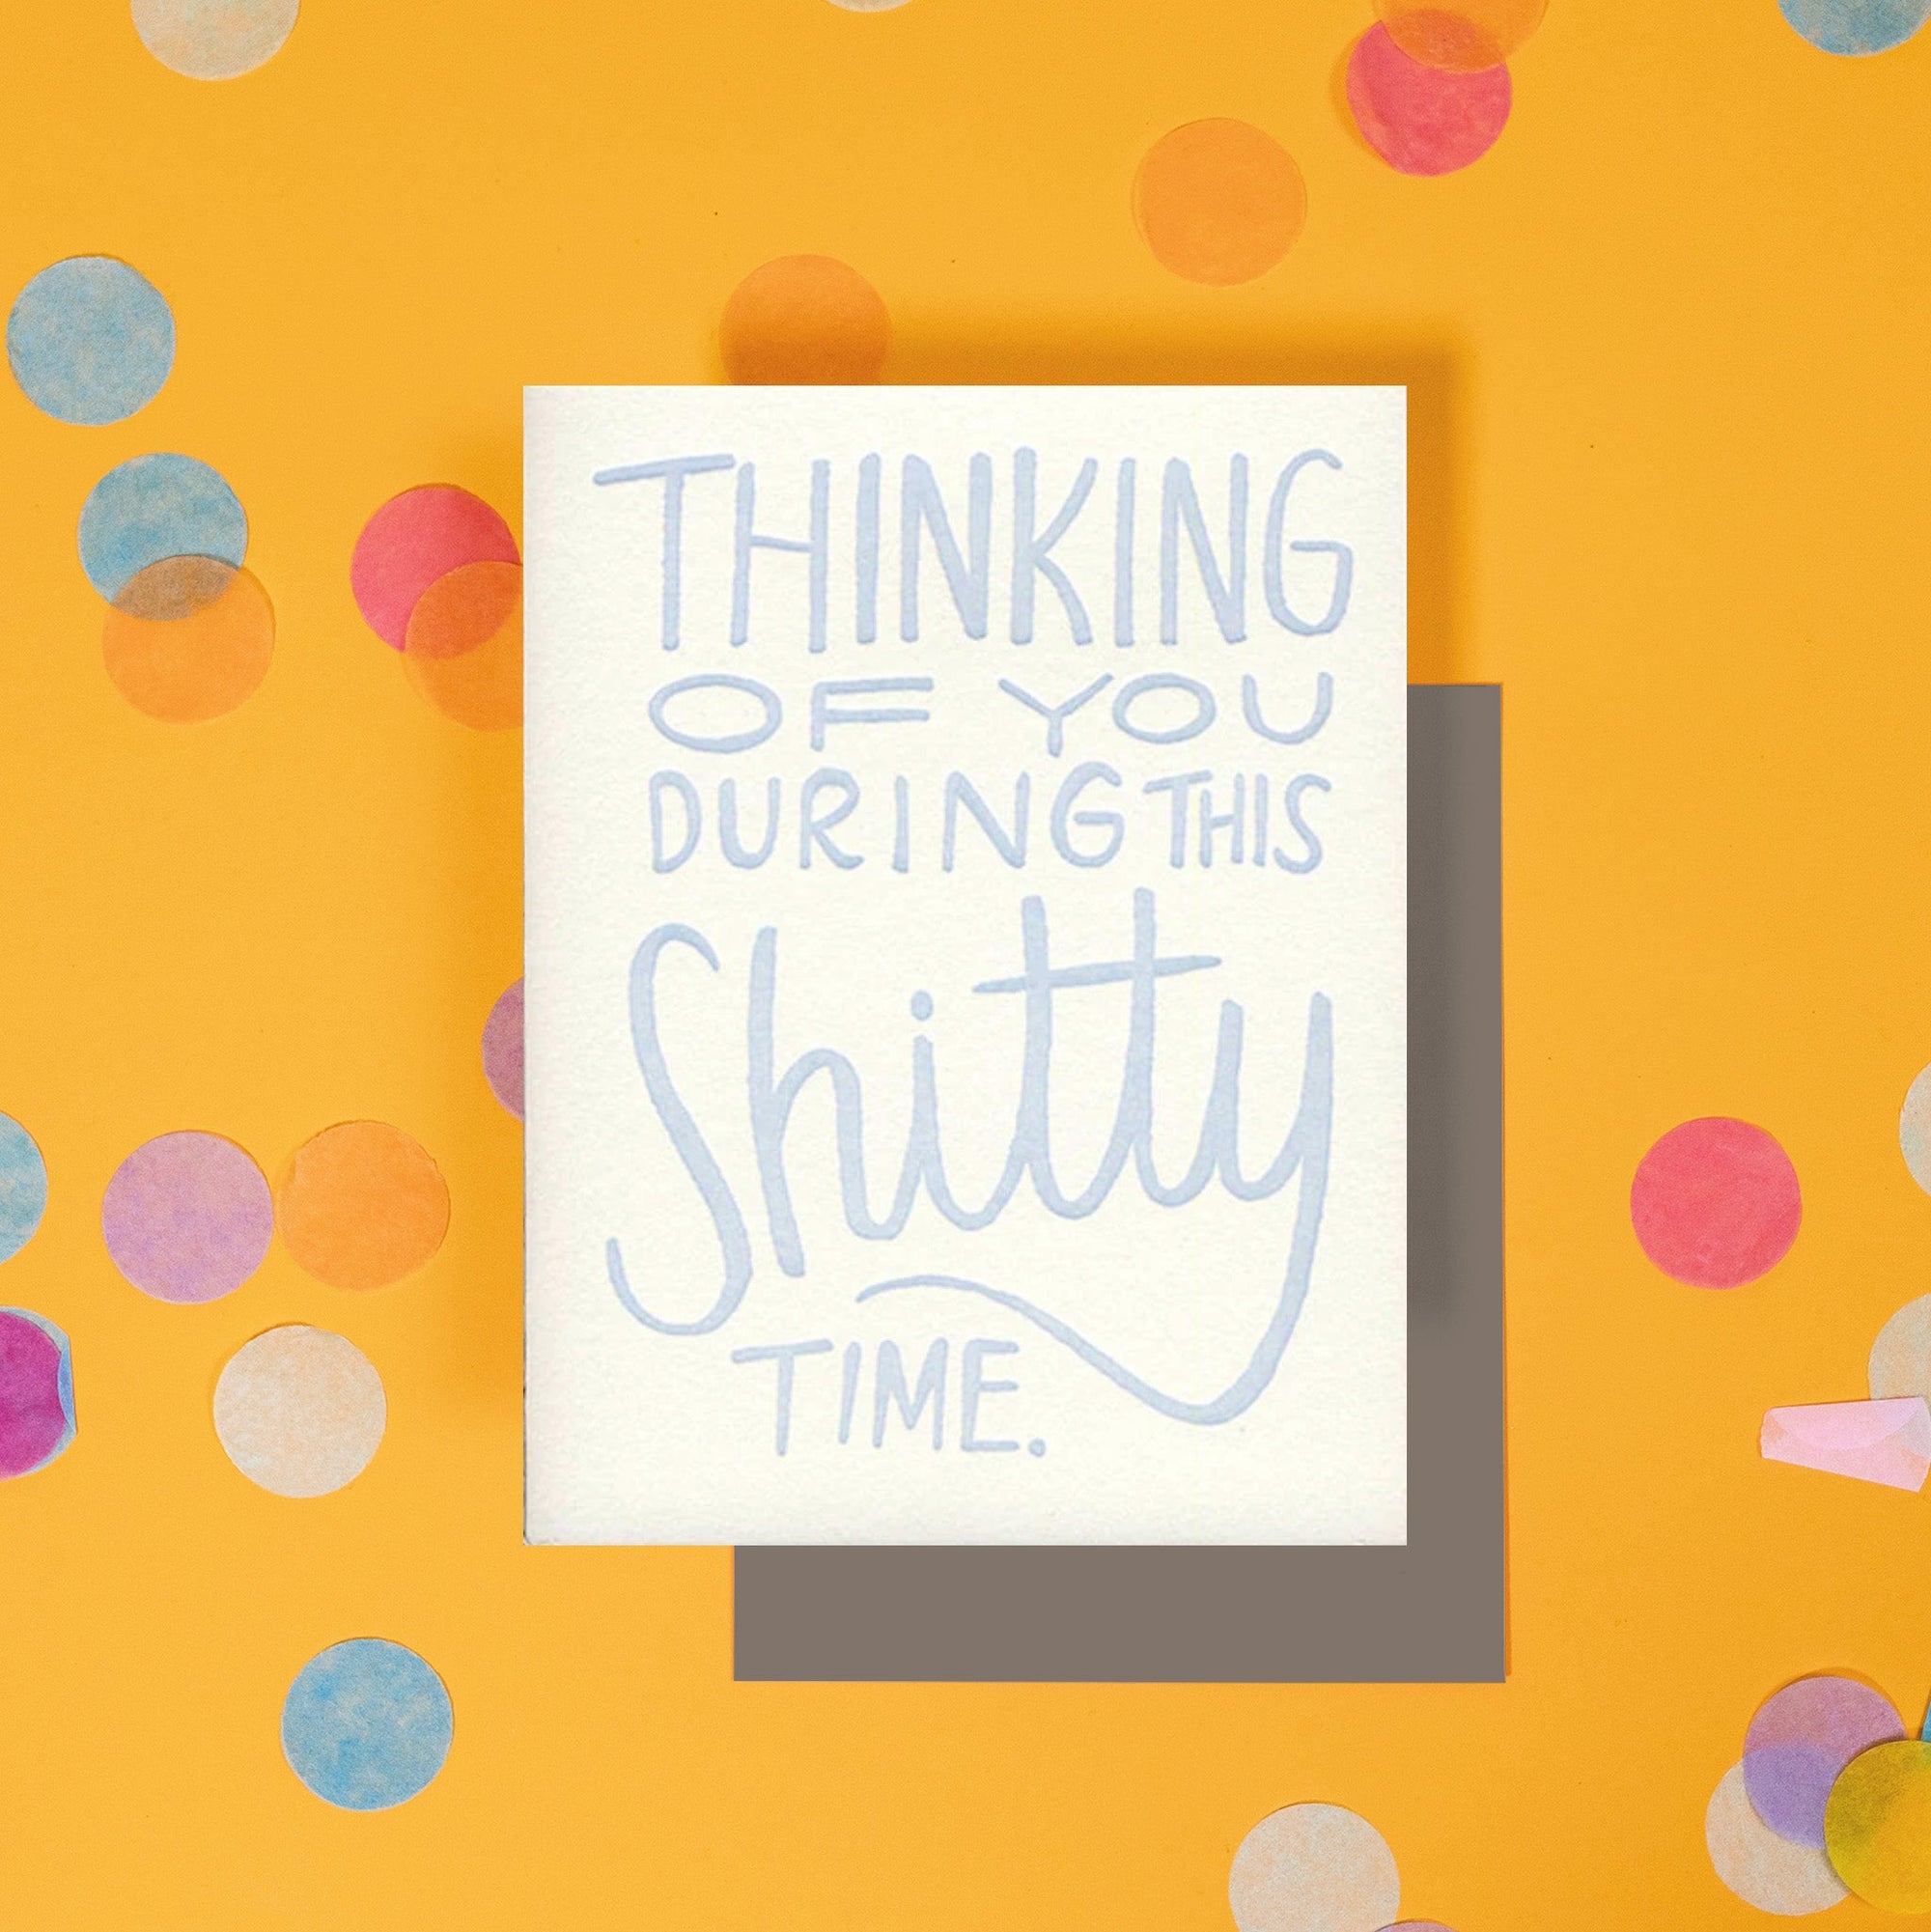 On a sunny mustard background is a greeting card and envelope with big, colorful confetti scattered around. The white greeting card says "Thinking of you during the shitty time." in a light blue, handwritten letterpress lettering. A taupe brown envelope sits under the card.